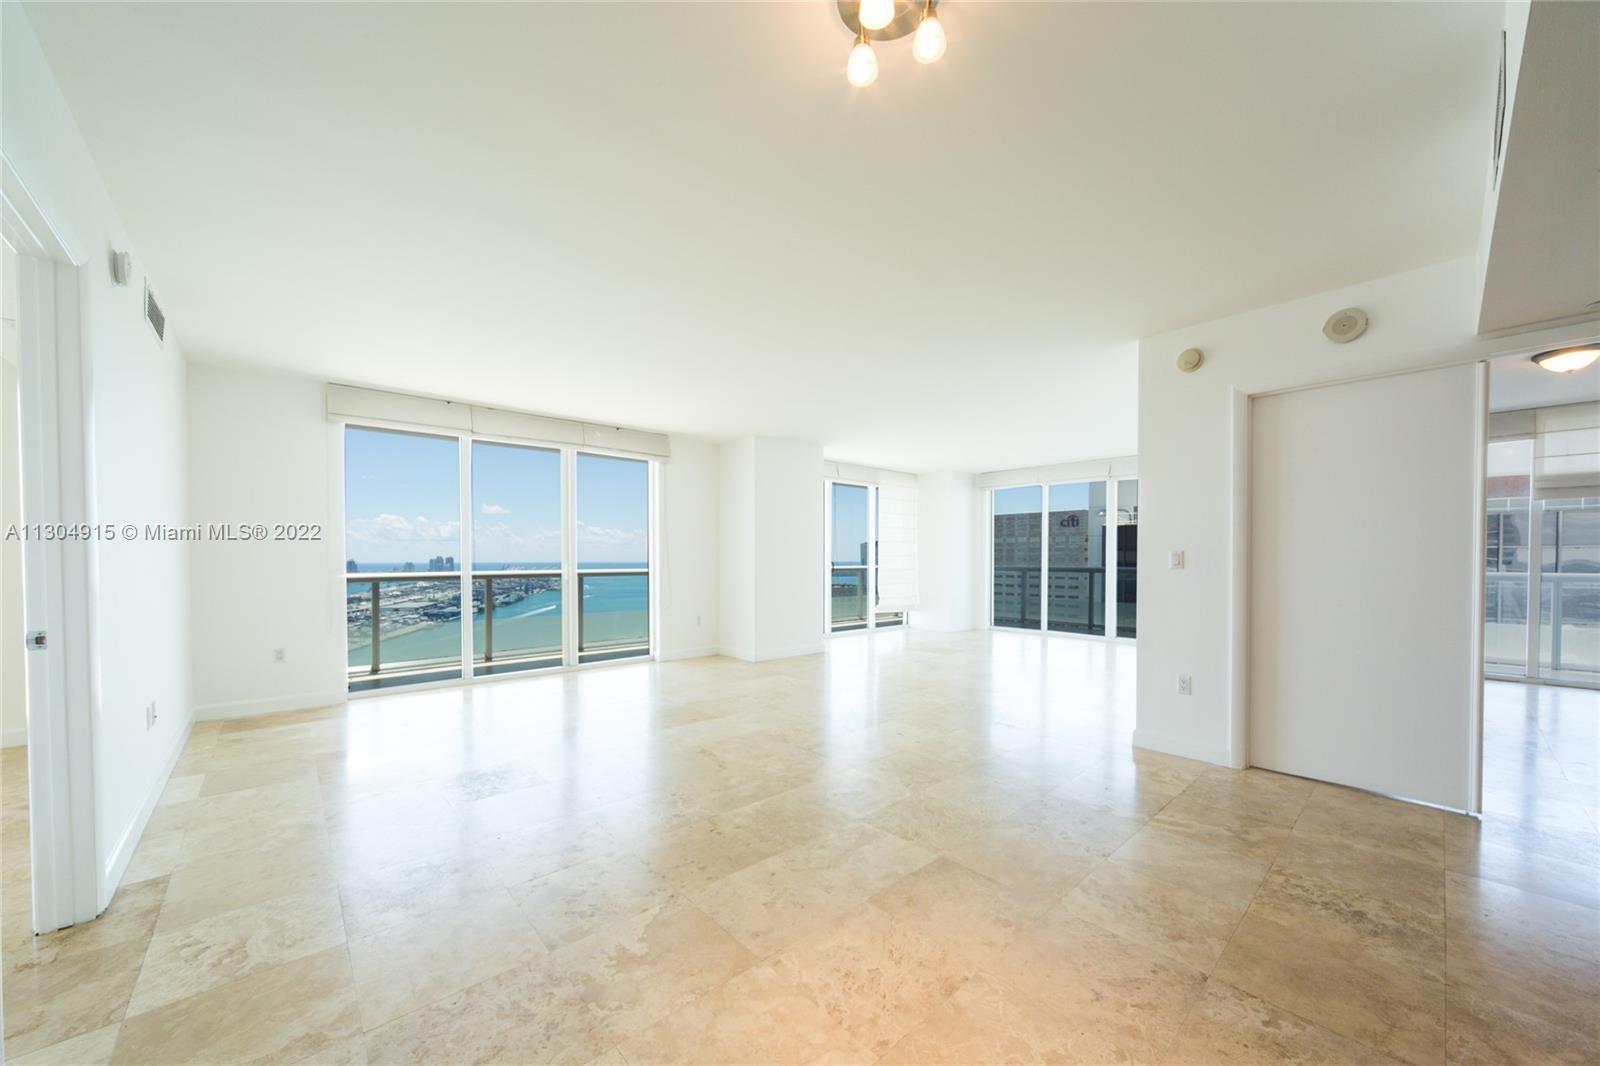 Beautiful three-bed, two-bath luxury condominium in the heart of downtown Miami with direct views of